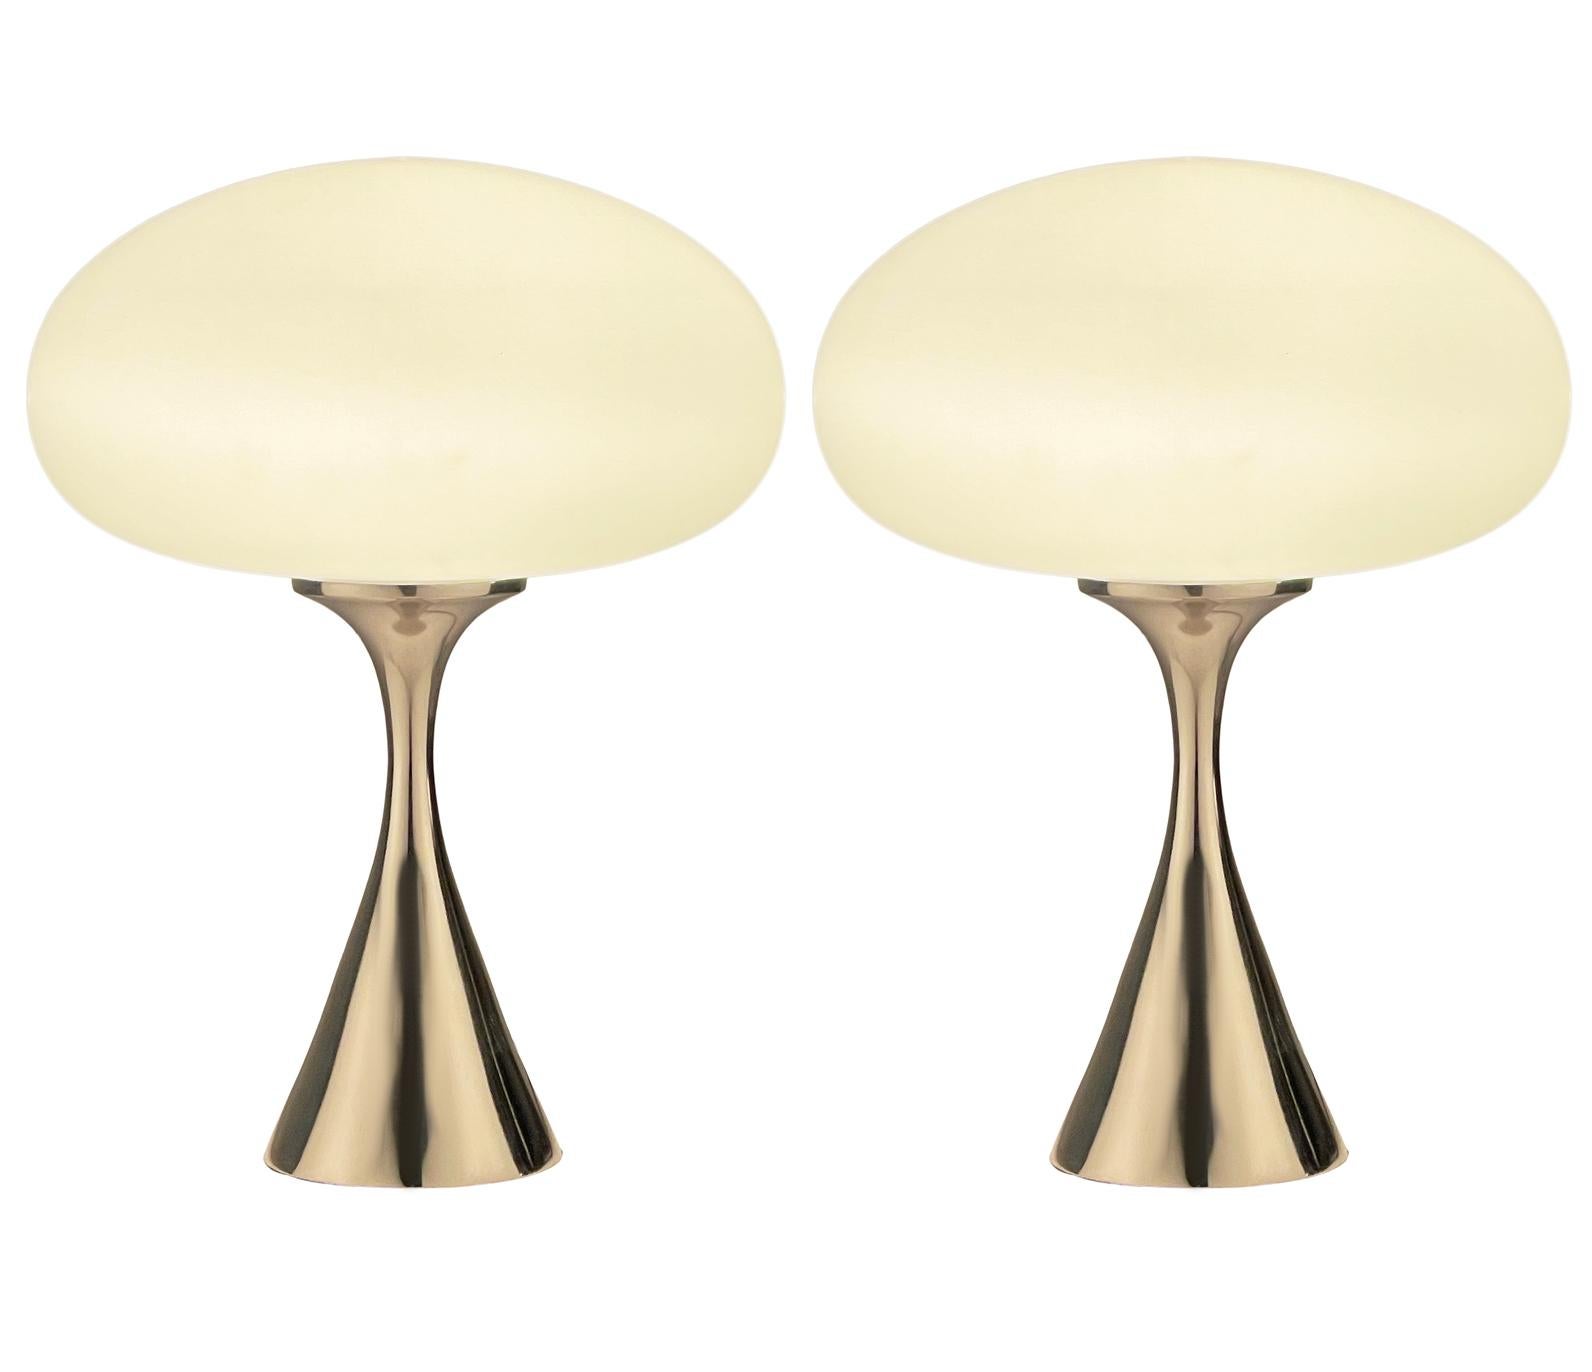 A handsome matching pair of table lamps in a conical mushroom form after Laurel Lamp Company. The lamps feature a chrome plated cast aluminum base with a mouth blown frosted glass lamp shade. Price includes the pair as shown.